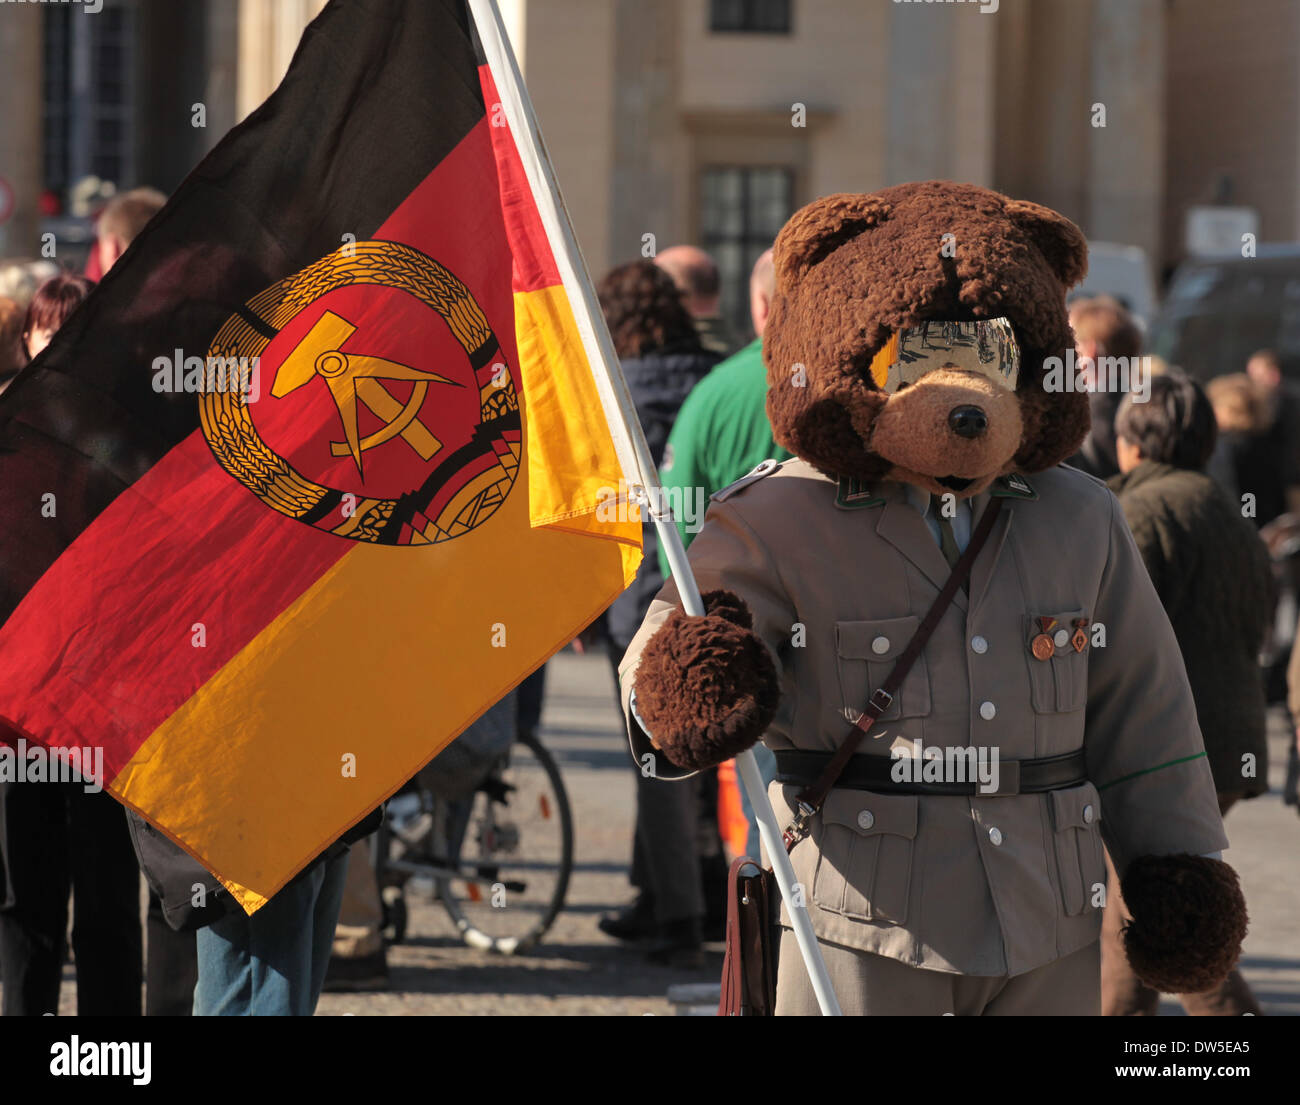 A Man dressed up as Berli bear waits for tourists with an East German flag at the Brandenburg Gate in Berlin, October, 03, 2013. More and more tourists come Berlin. The photo is part of a series on tourism in Berlin. Photo. Wolfram Steinberg dpa Stock Photo